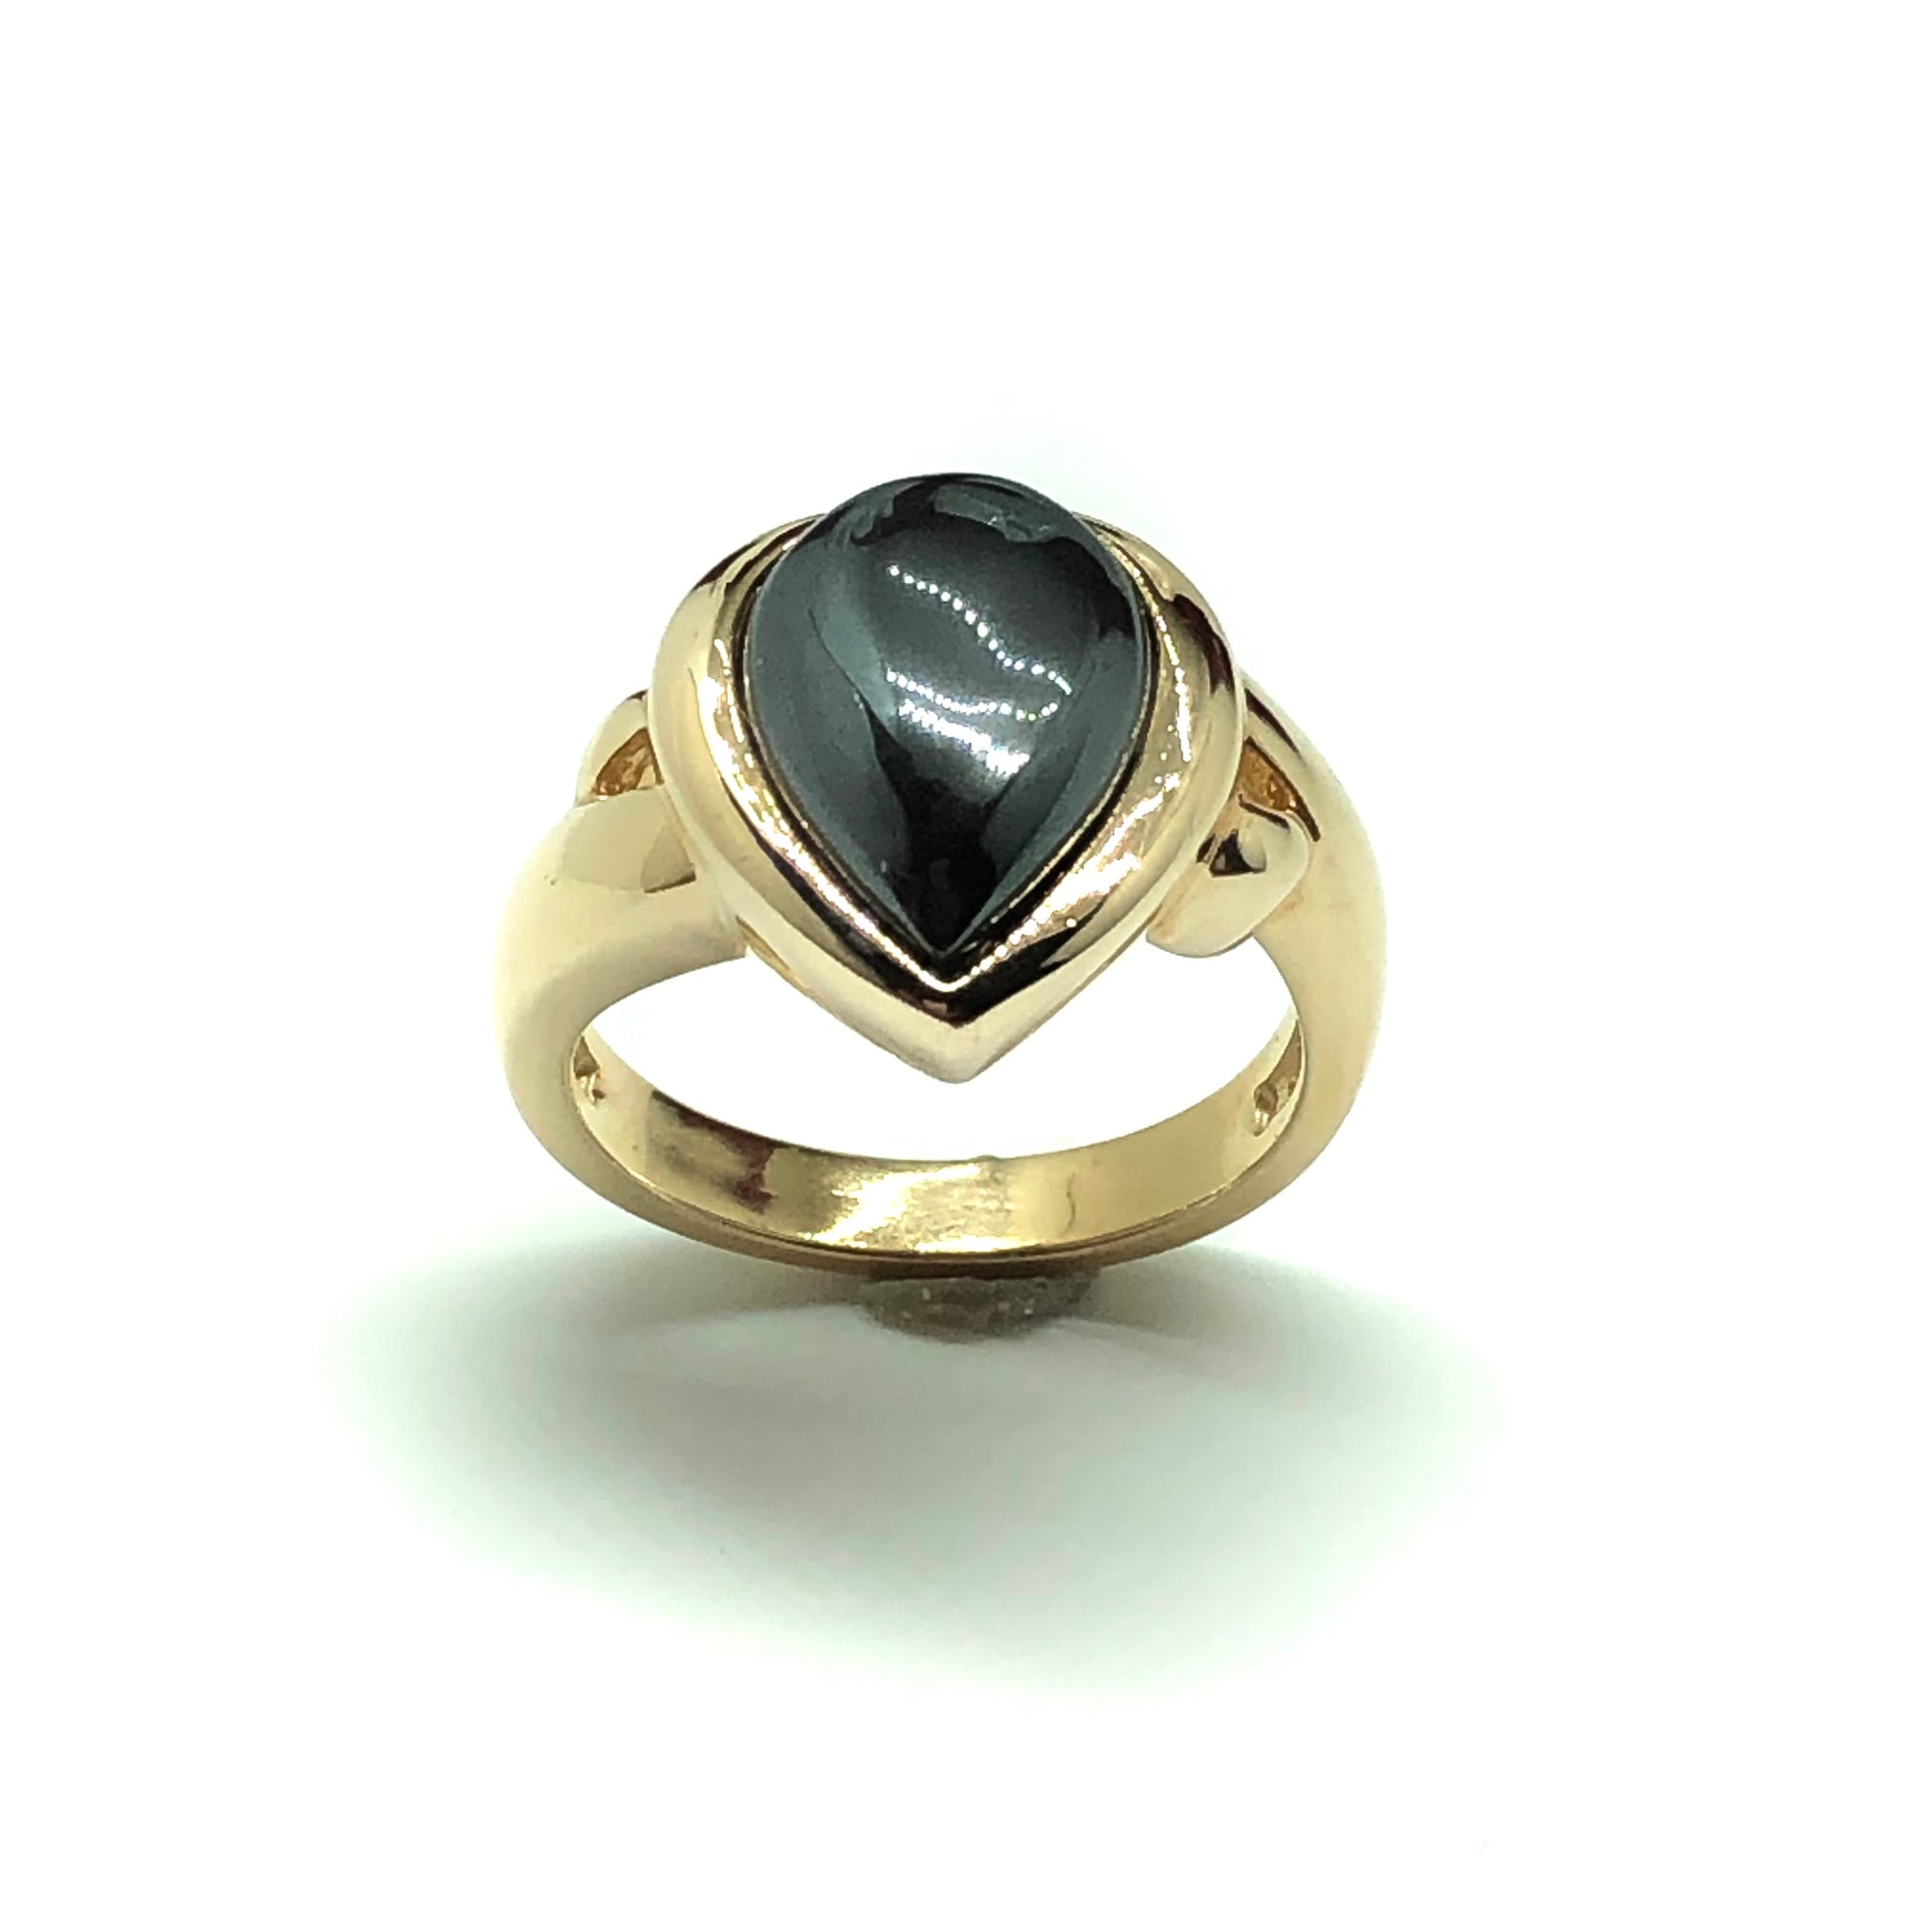 Estate Jewelry - Yellow Gold Sterling Silver Bold Teardrop Hematite Stone Band Ring